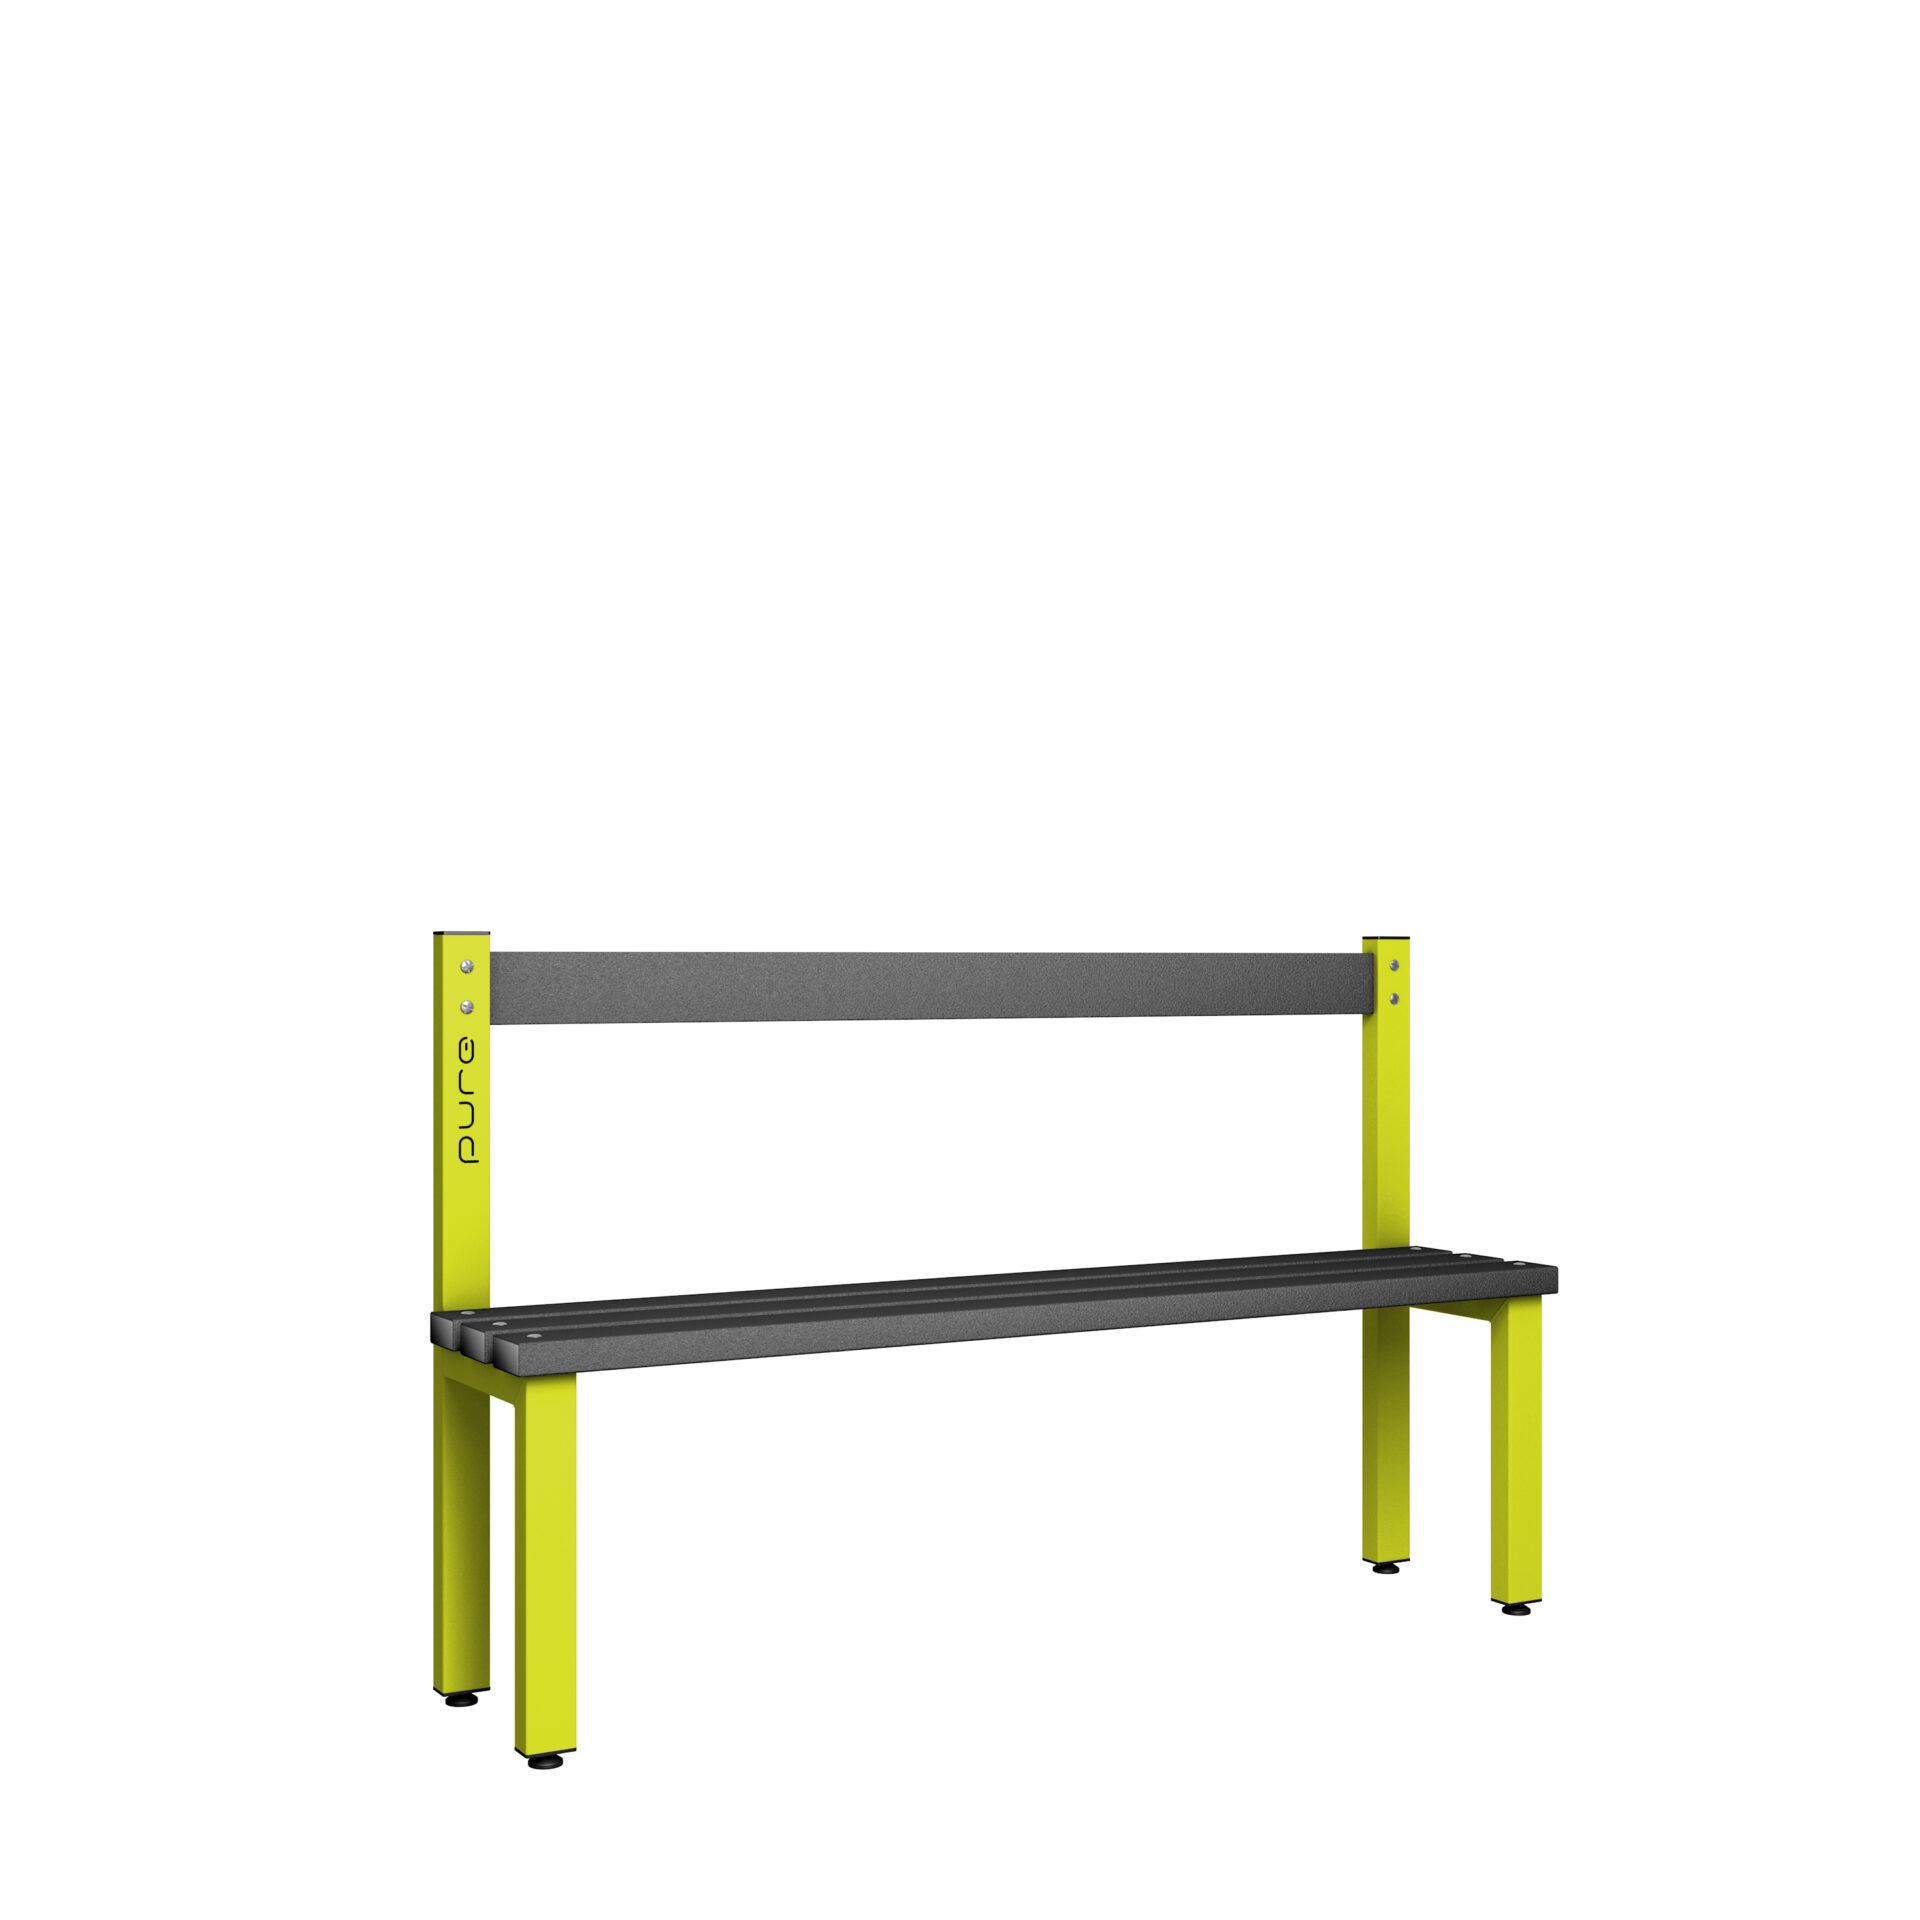 Pure Carbon Zero Single Sided 1500mm Low Height Back Rest Bench